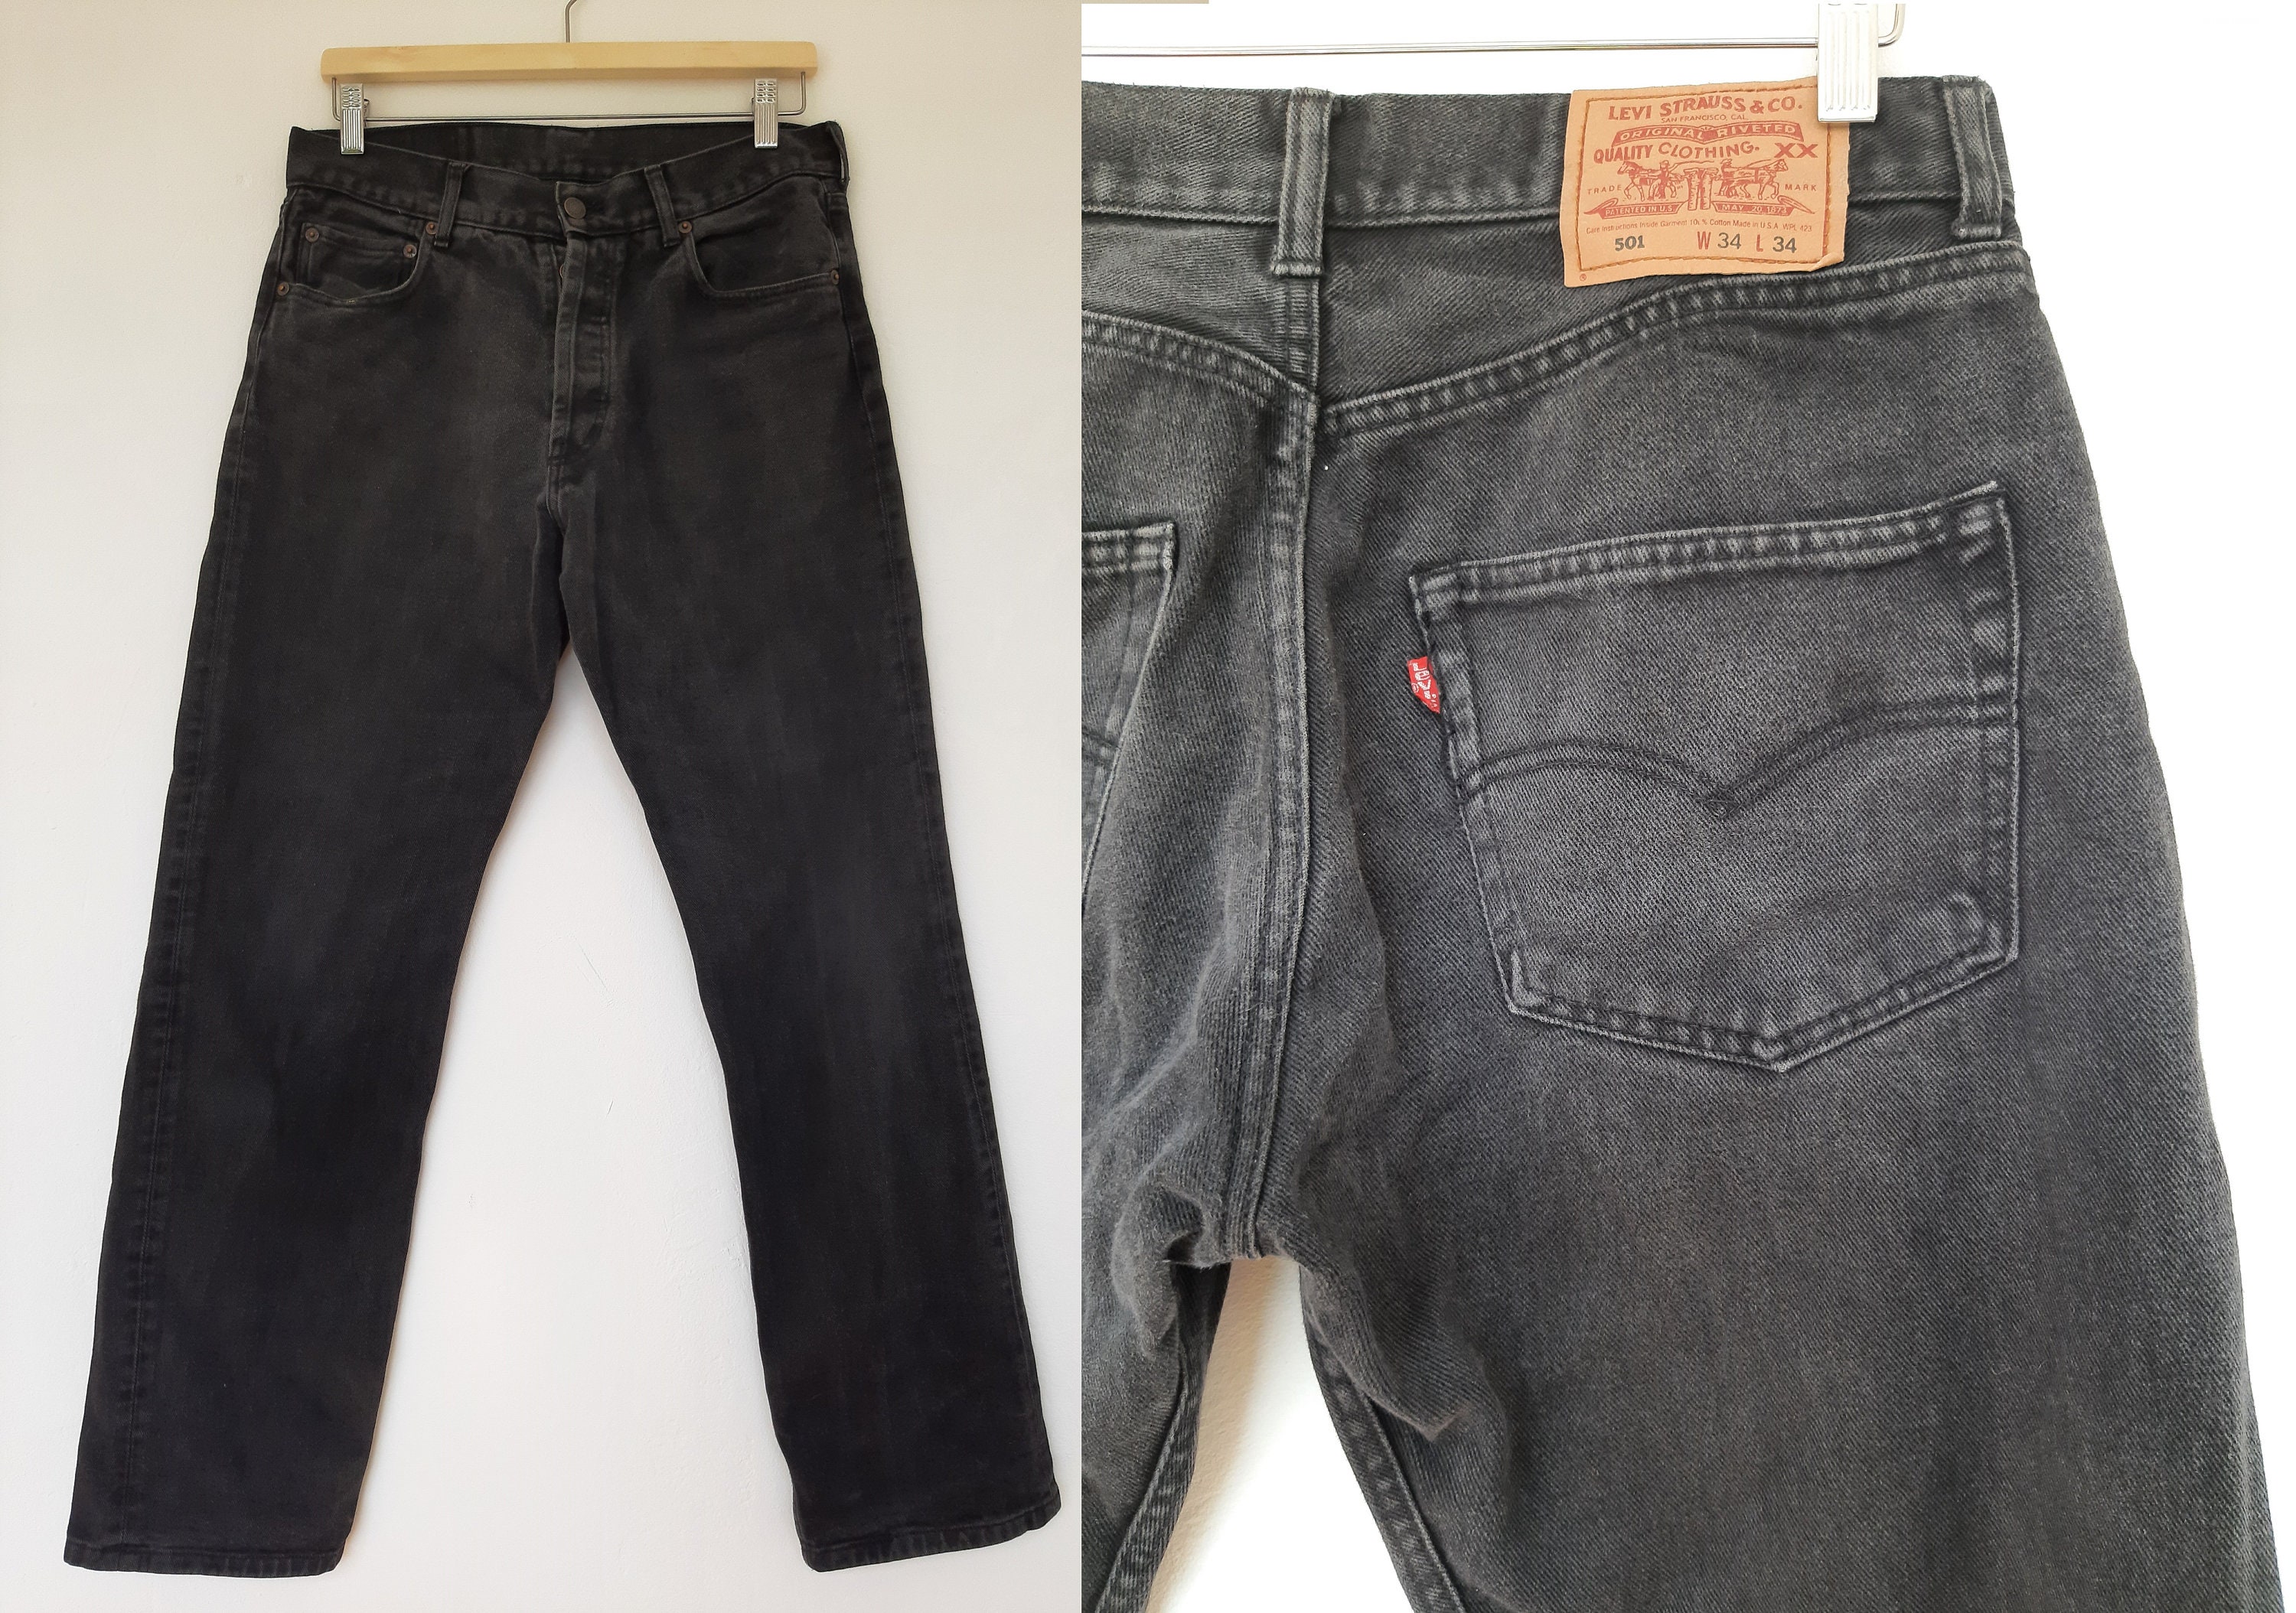 Levis strauss jeans -  France